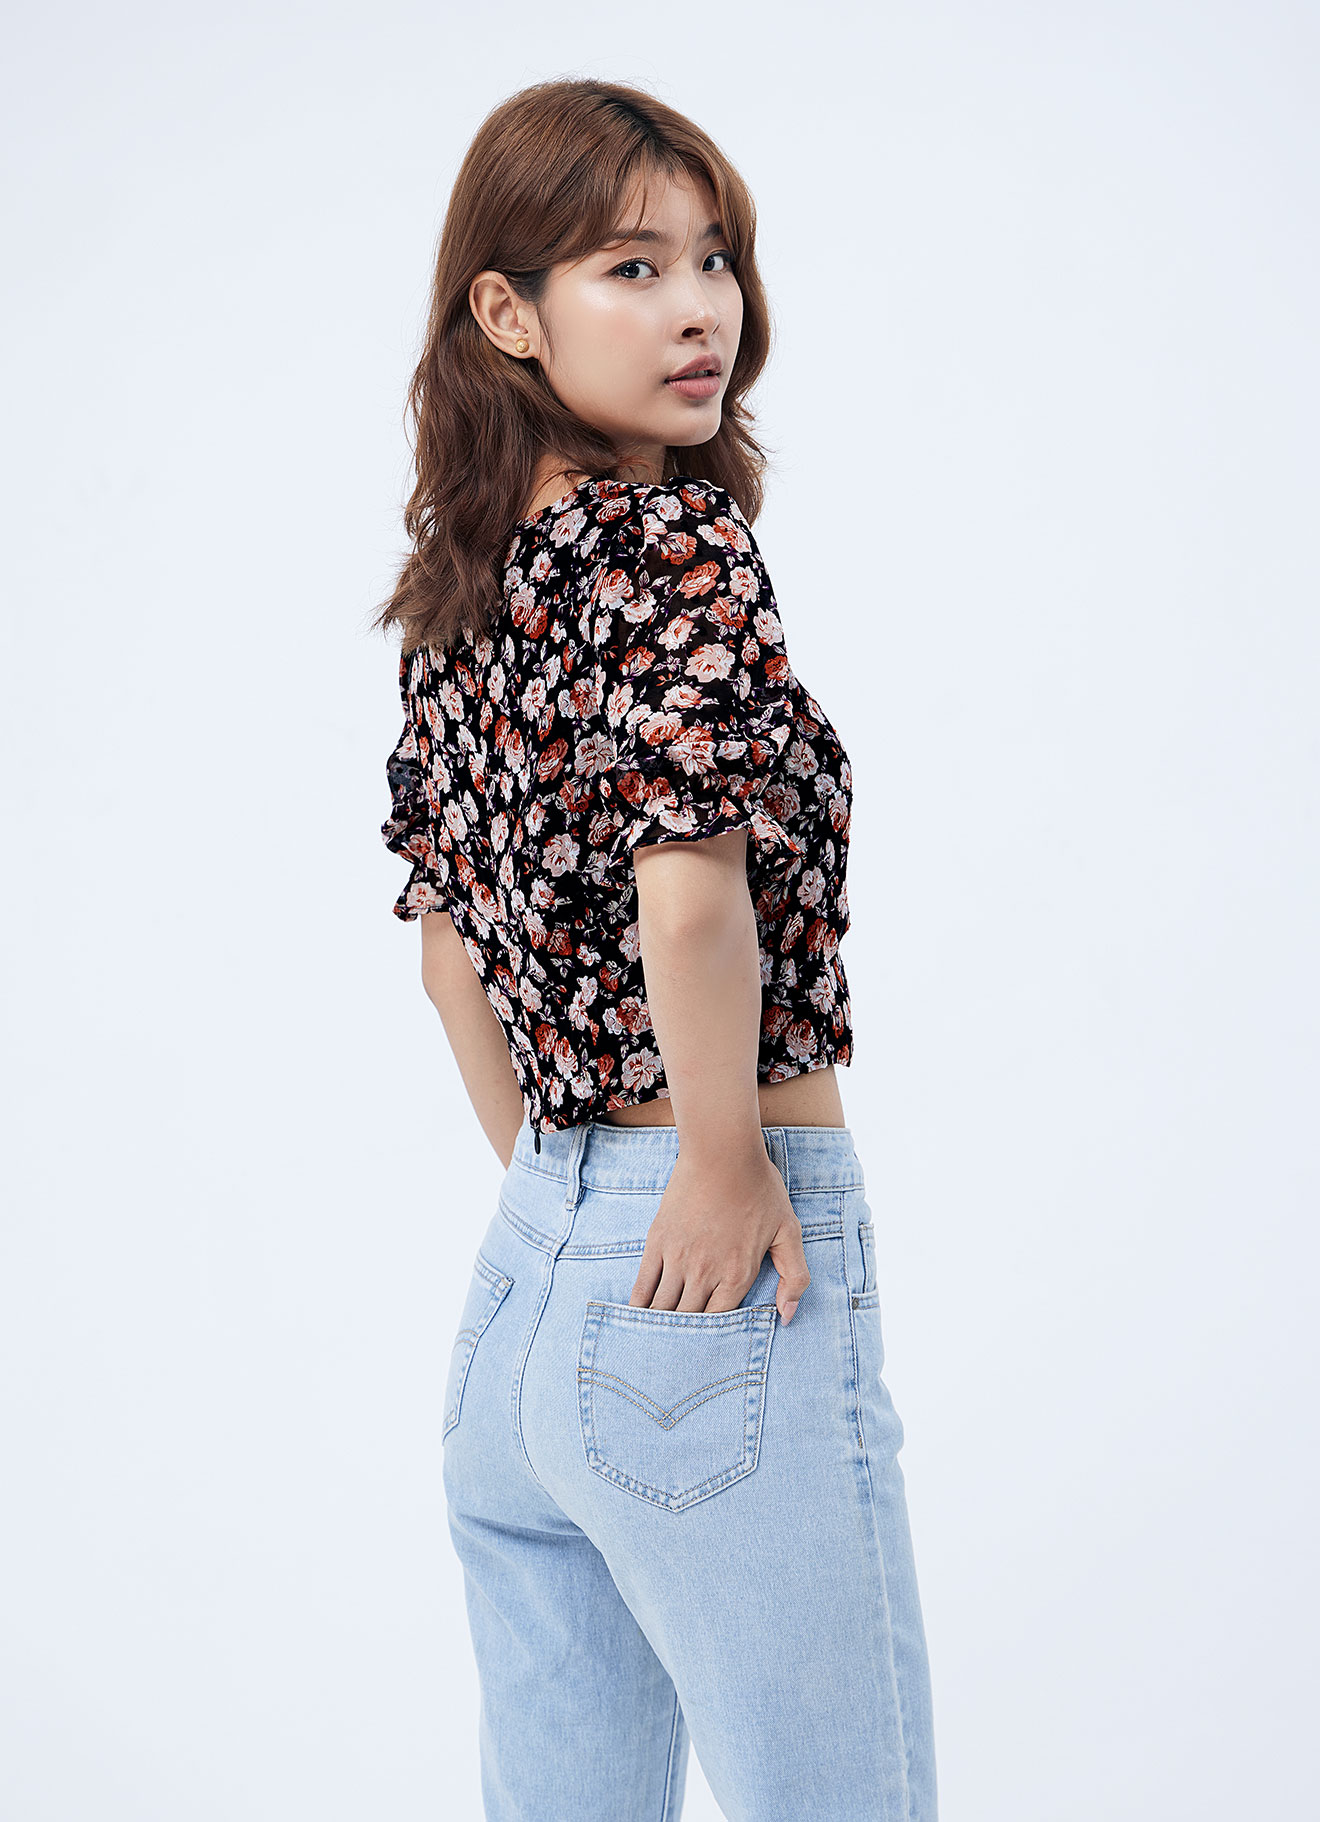 Amber-Brown  by Floral Printed Blouse